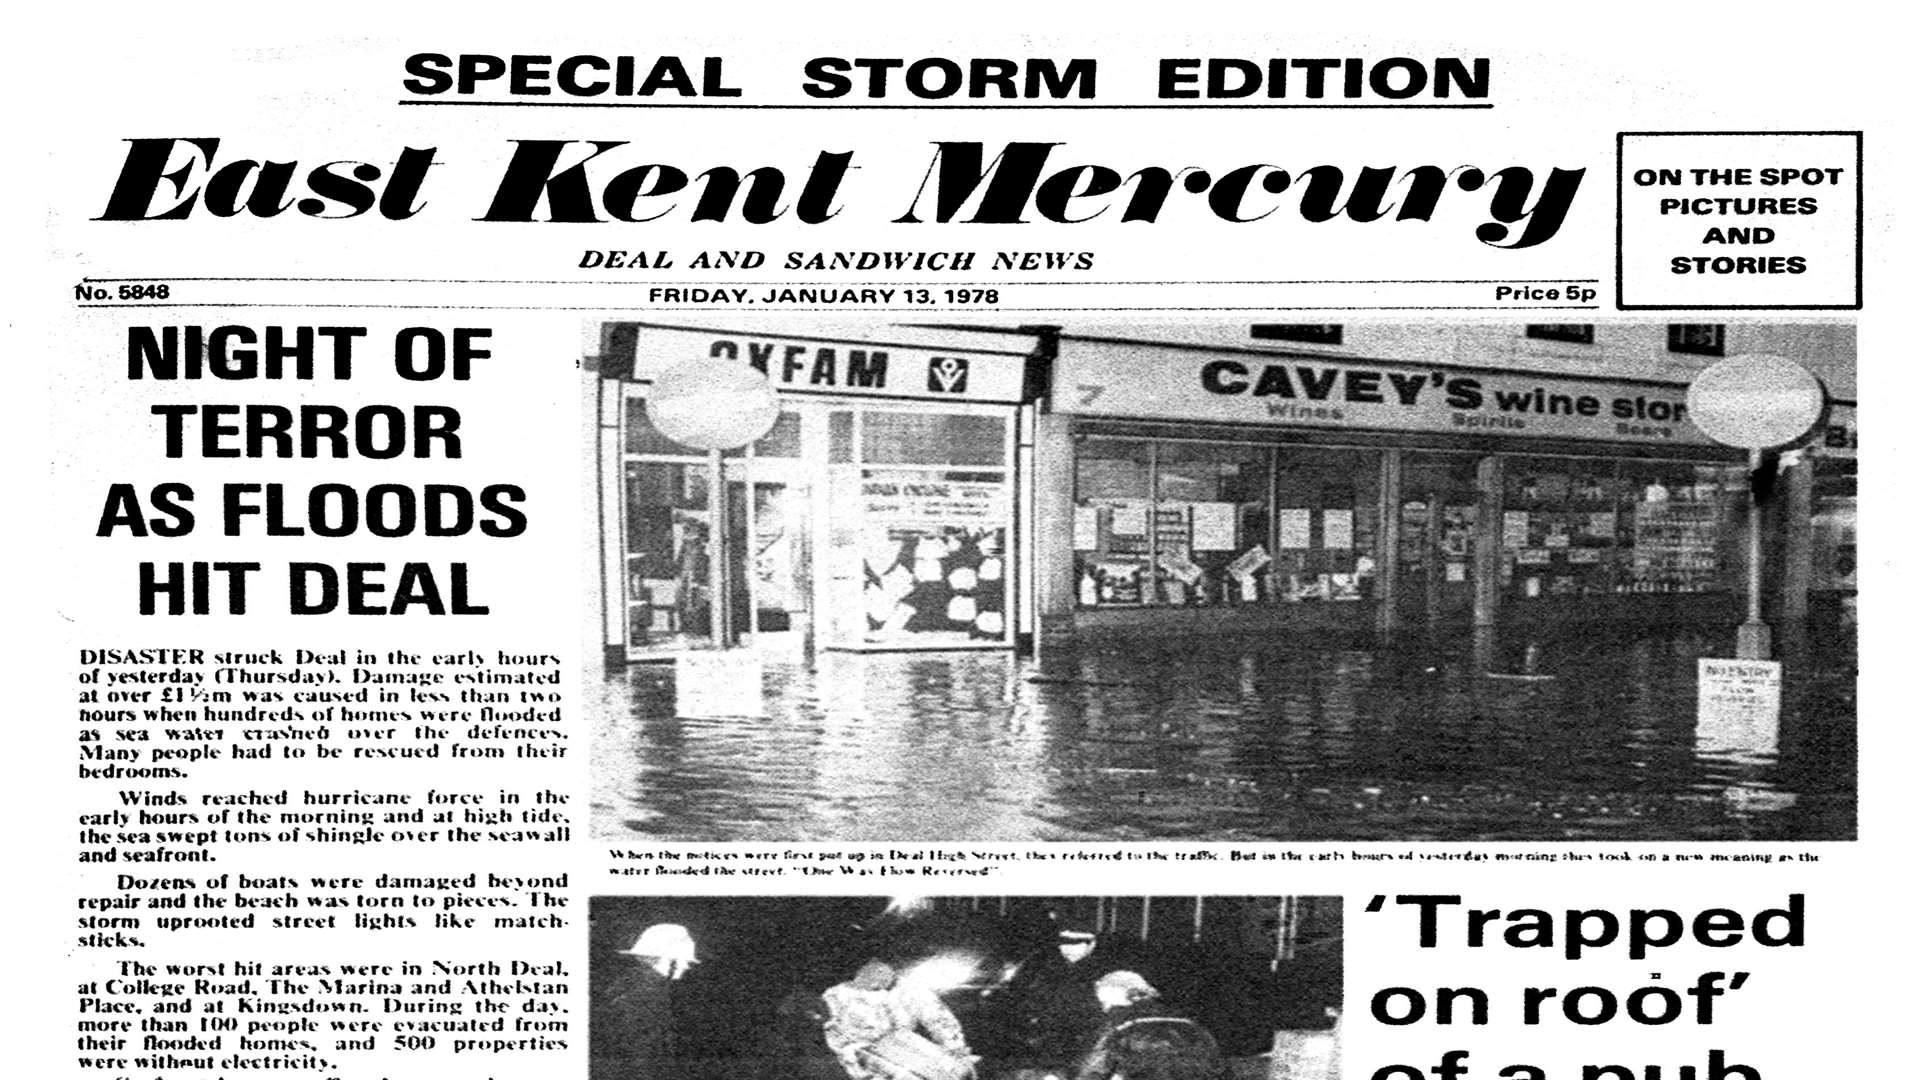 January 13, 1978 - the Mercury's storm special